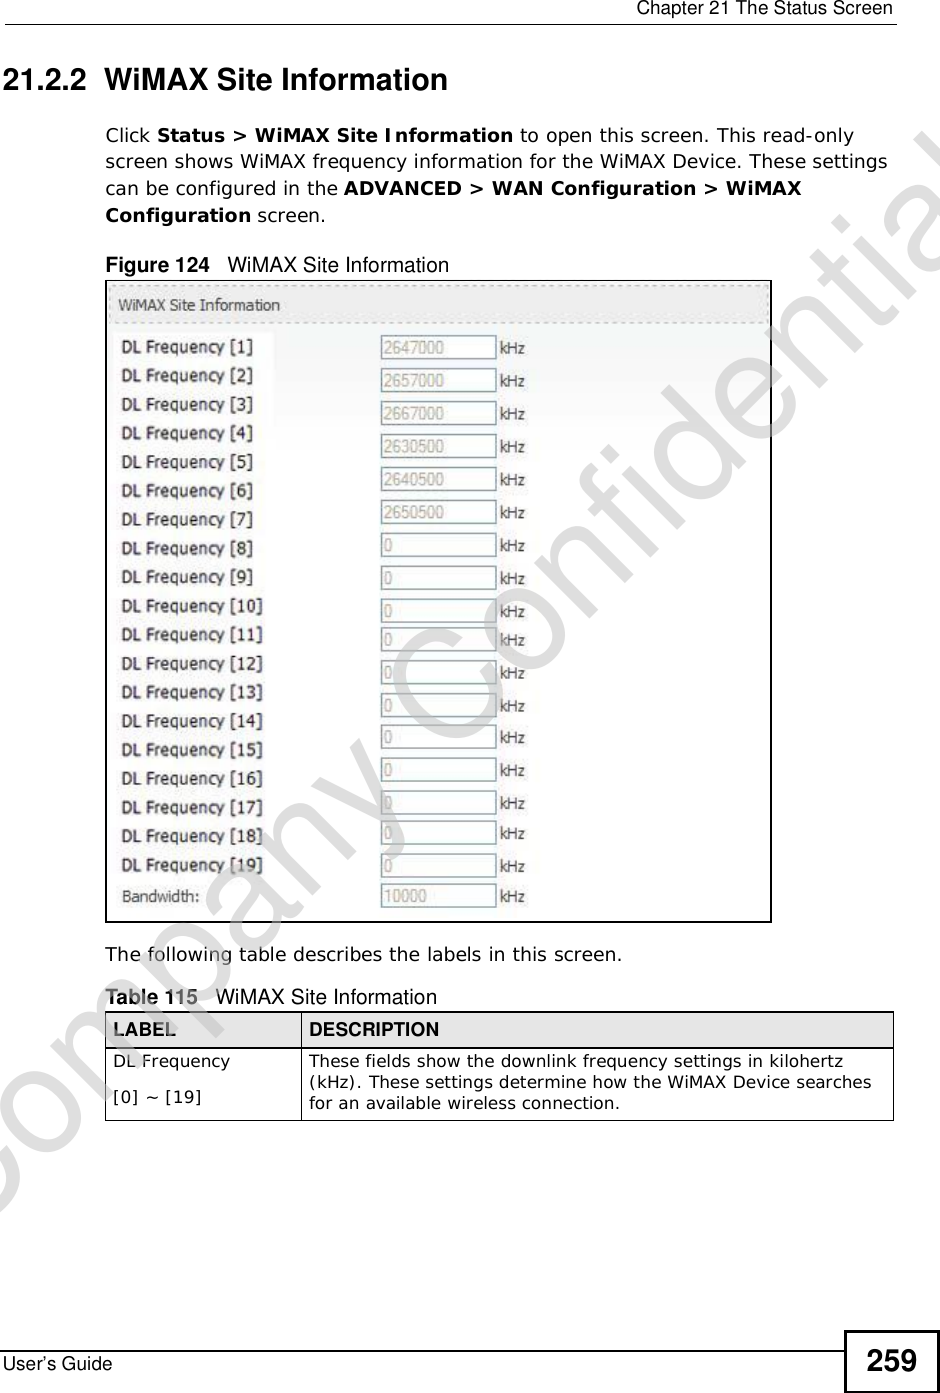  Chapter 21The Status ScreenUser’s Guide 25921.2.2  WiMAX Site InformationClick Status &gt; WiMAX Site Information to open this screen. This read-only screen shows WiMAX frequency information for the WiMAX Device. These settings can be configured in the ADVANCED &gt; WAN Configuration &gt; WiMAX Configuration screen.Figure 124   WiMAX Site Information The following table describes the labels in this screen. Table 115   WiMAX Site InformationLABEL DESCRIPTIONDL Frequency[0] ~ [19]These fields show the downlink frequency settings in kilohertz (kHz). These settings determine how the WiMAX Device searches for an available wireless connection.Company Confidential